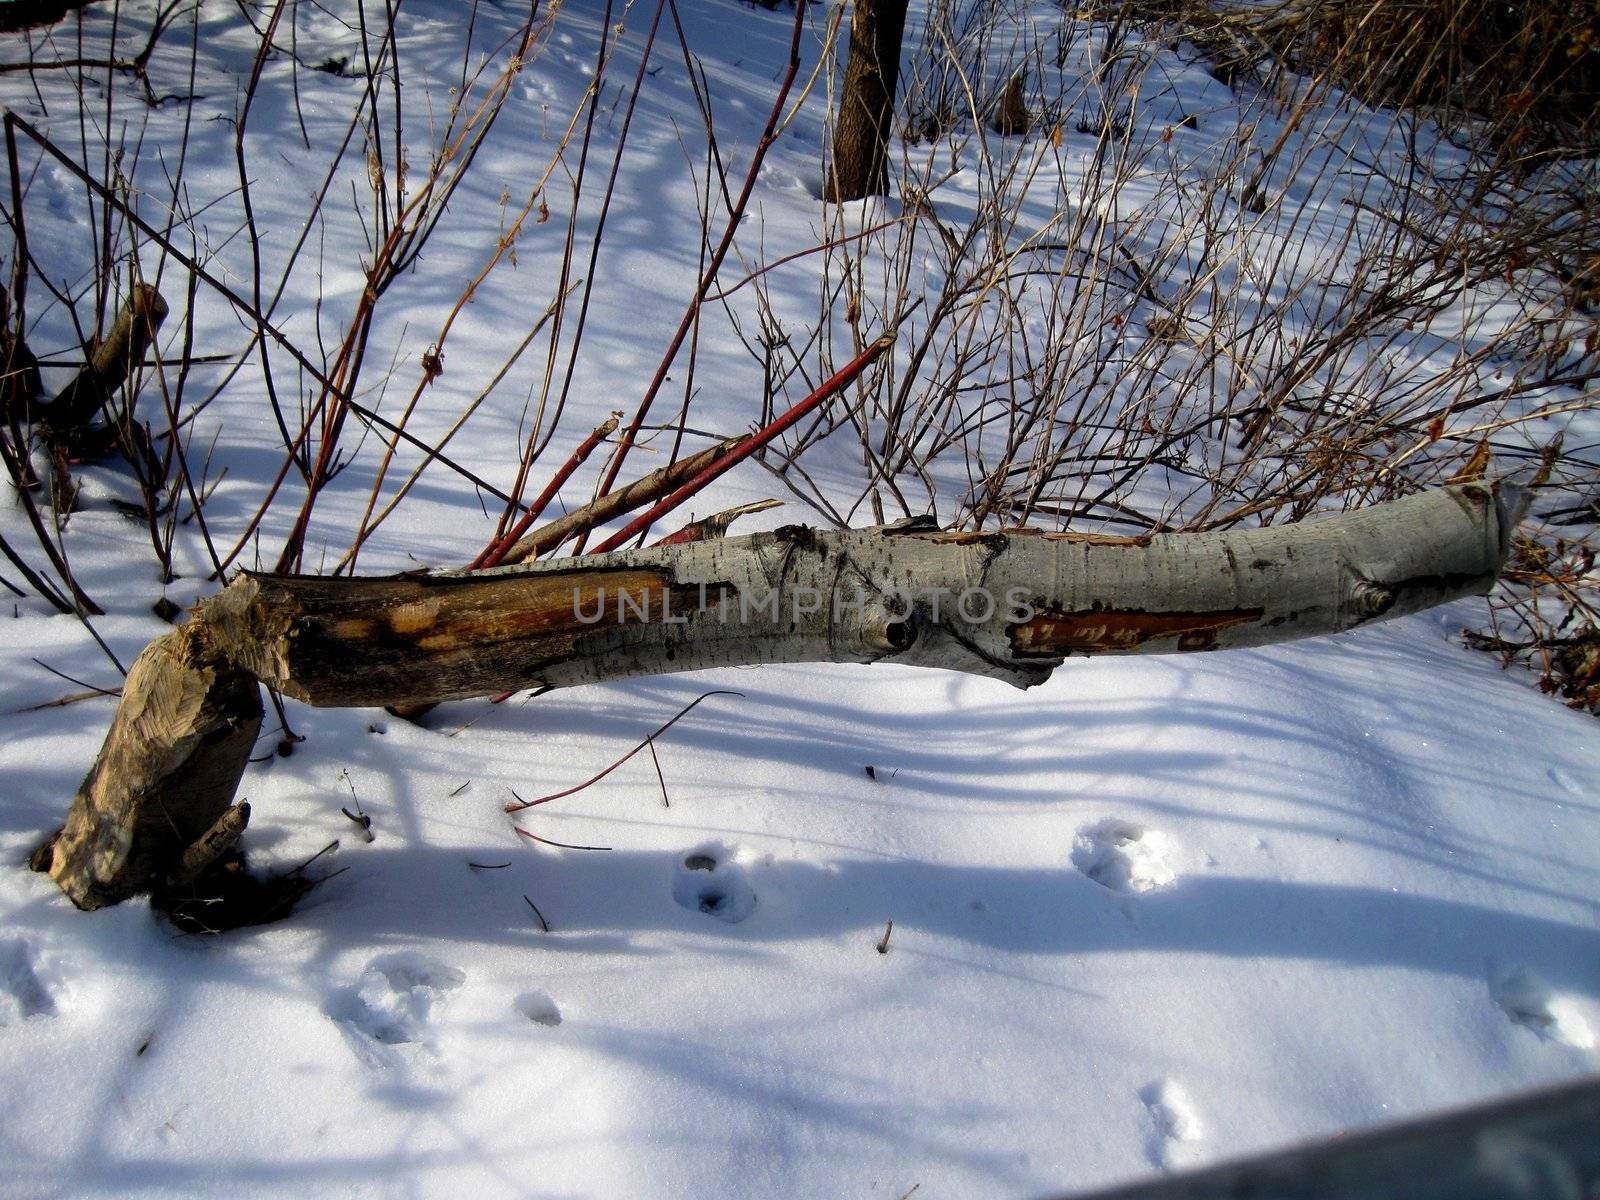 Fallen down tree, chewed by beavers, hovering over snow covered ground.